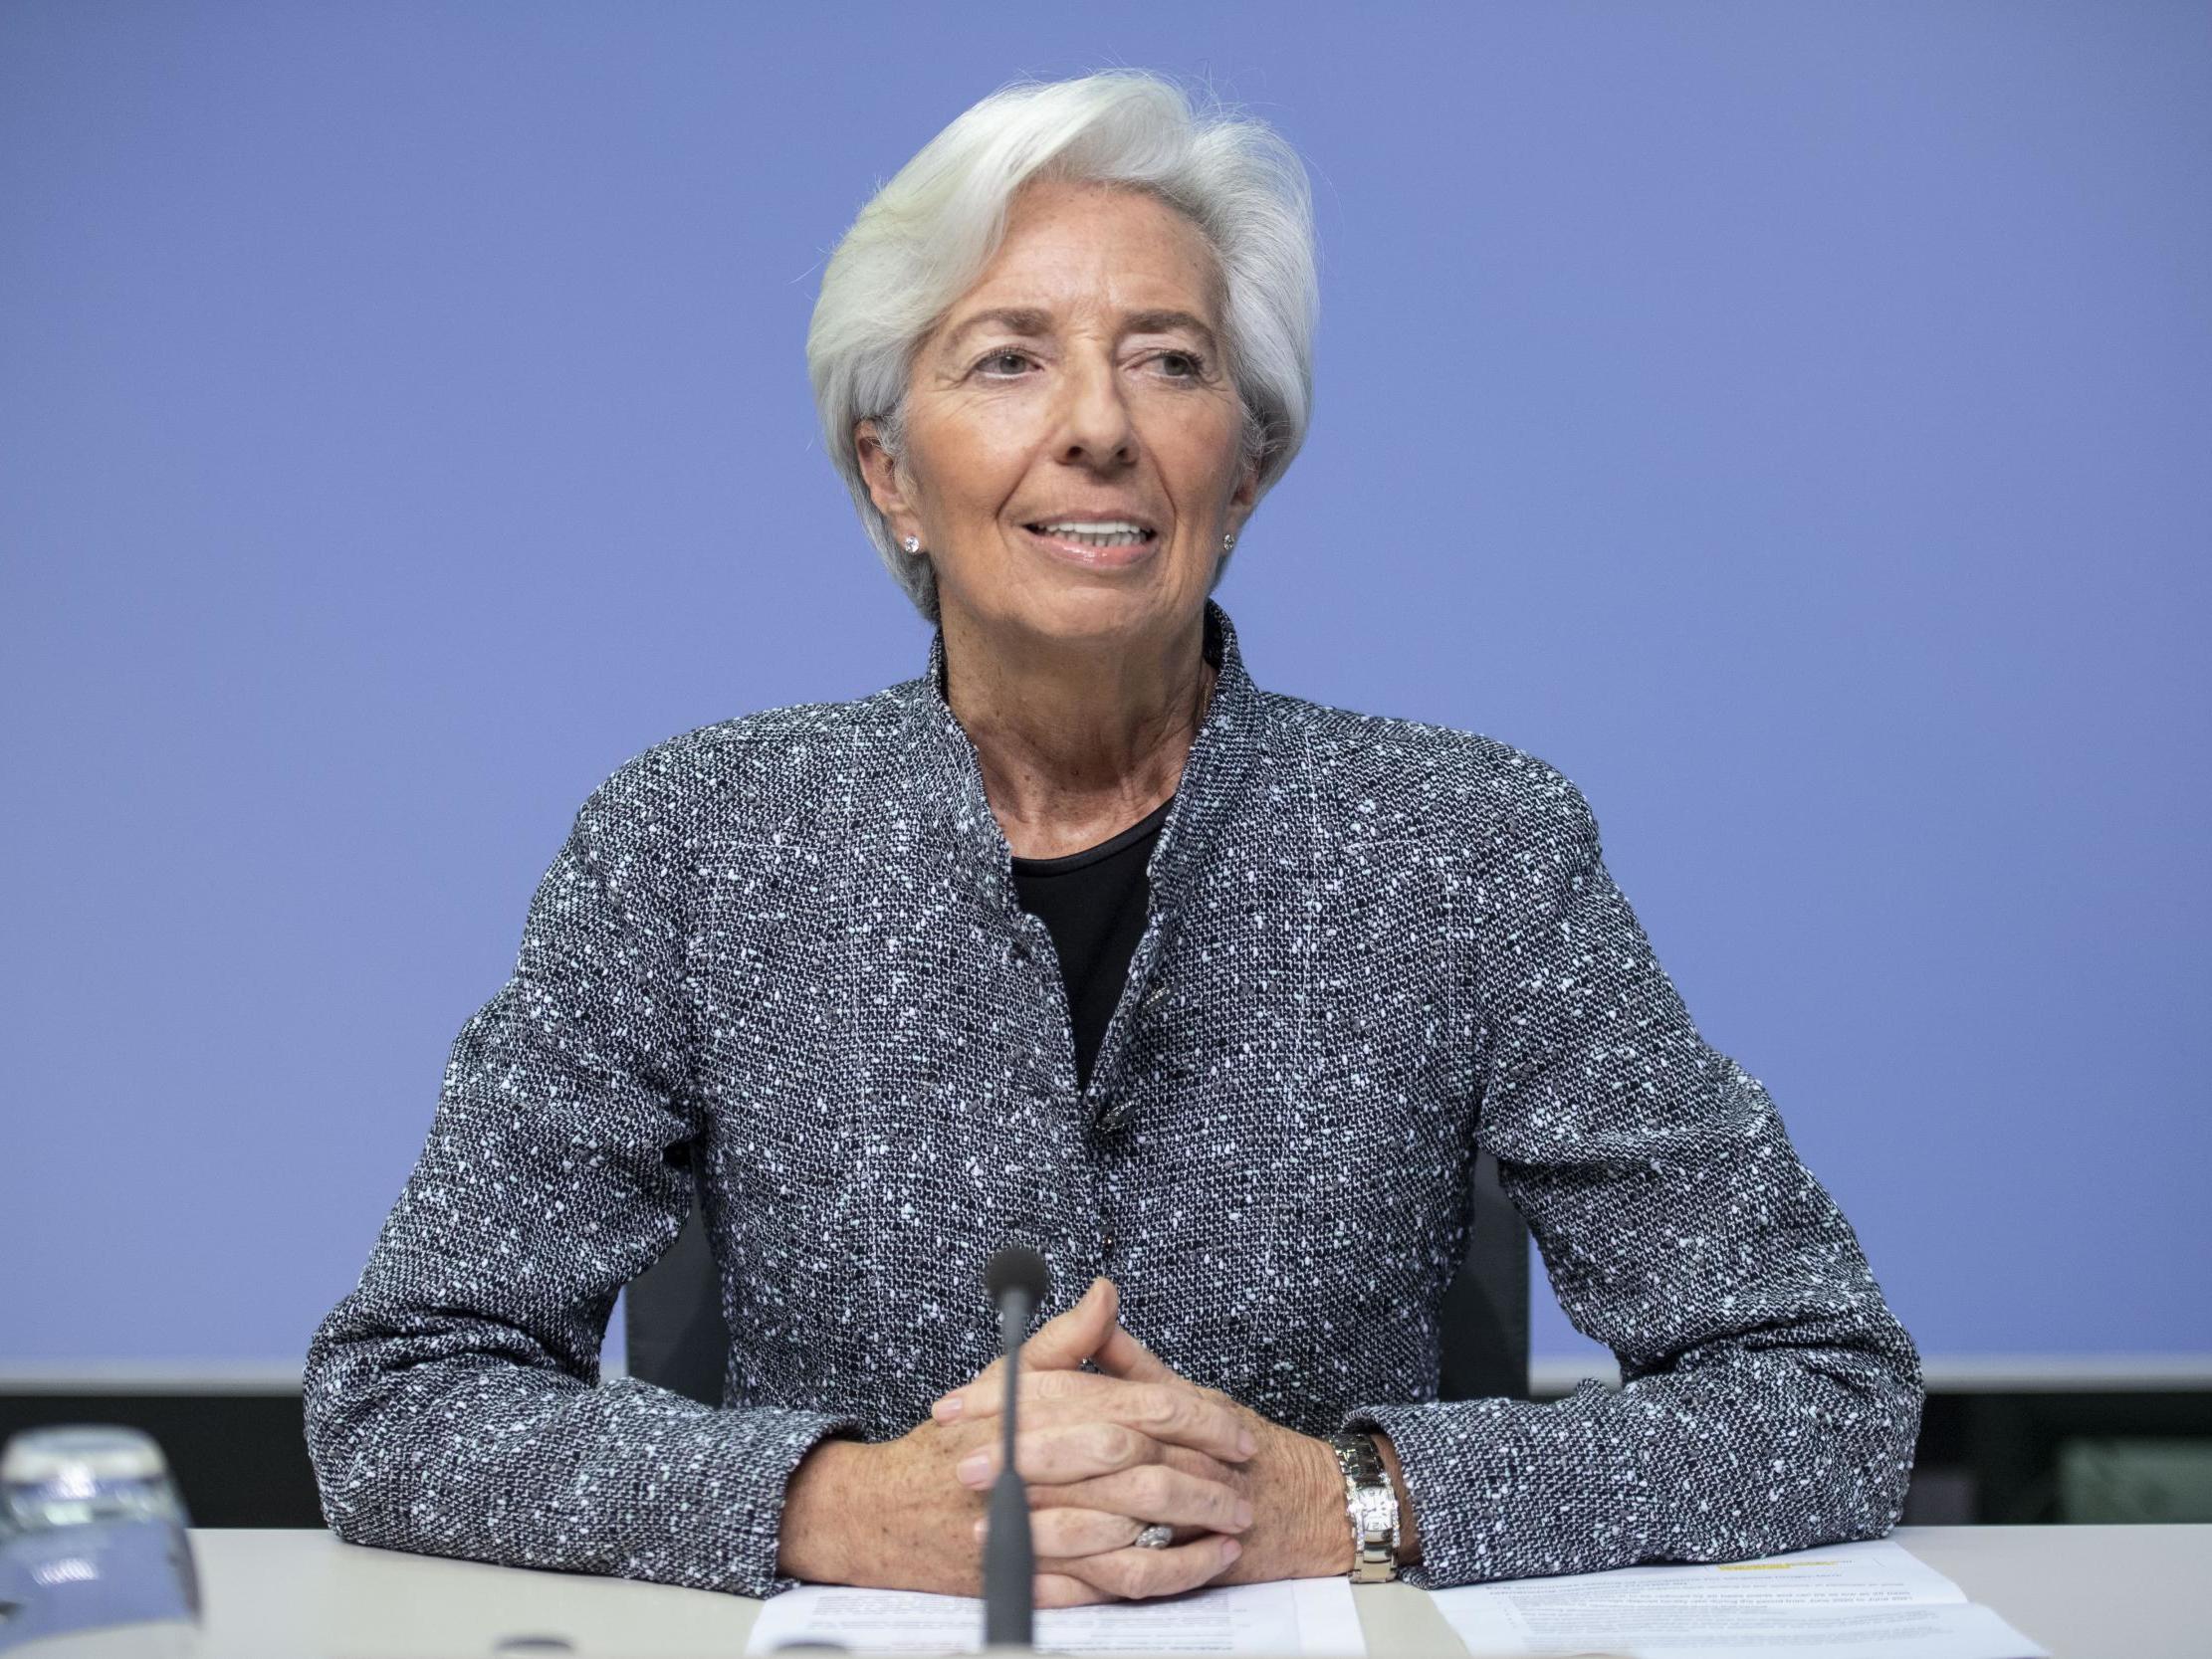 Christine Lagarde has said woman leaders have played "an incredible role" during pandemic